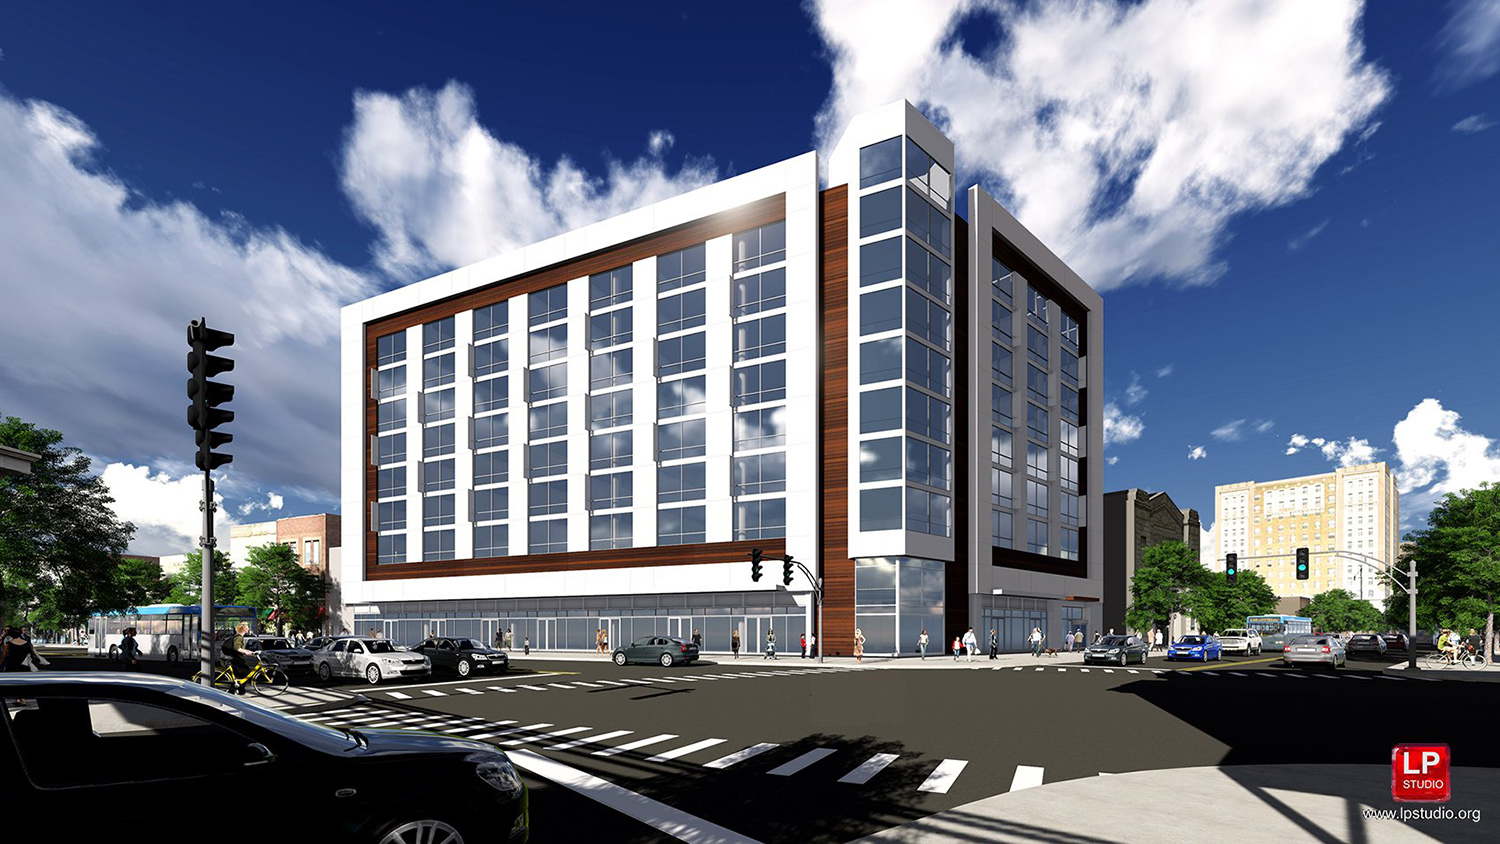 View of Previous Development Scheme for 4601 N Broadway. Rendering by MX3 Architects